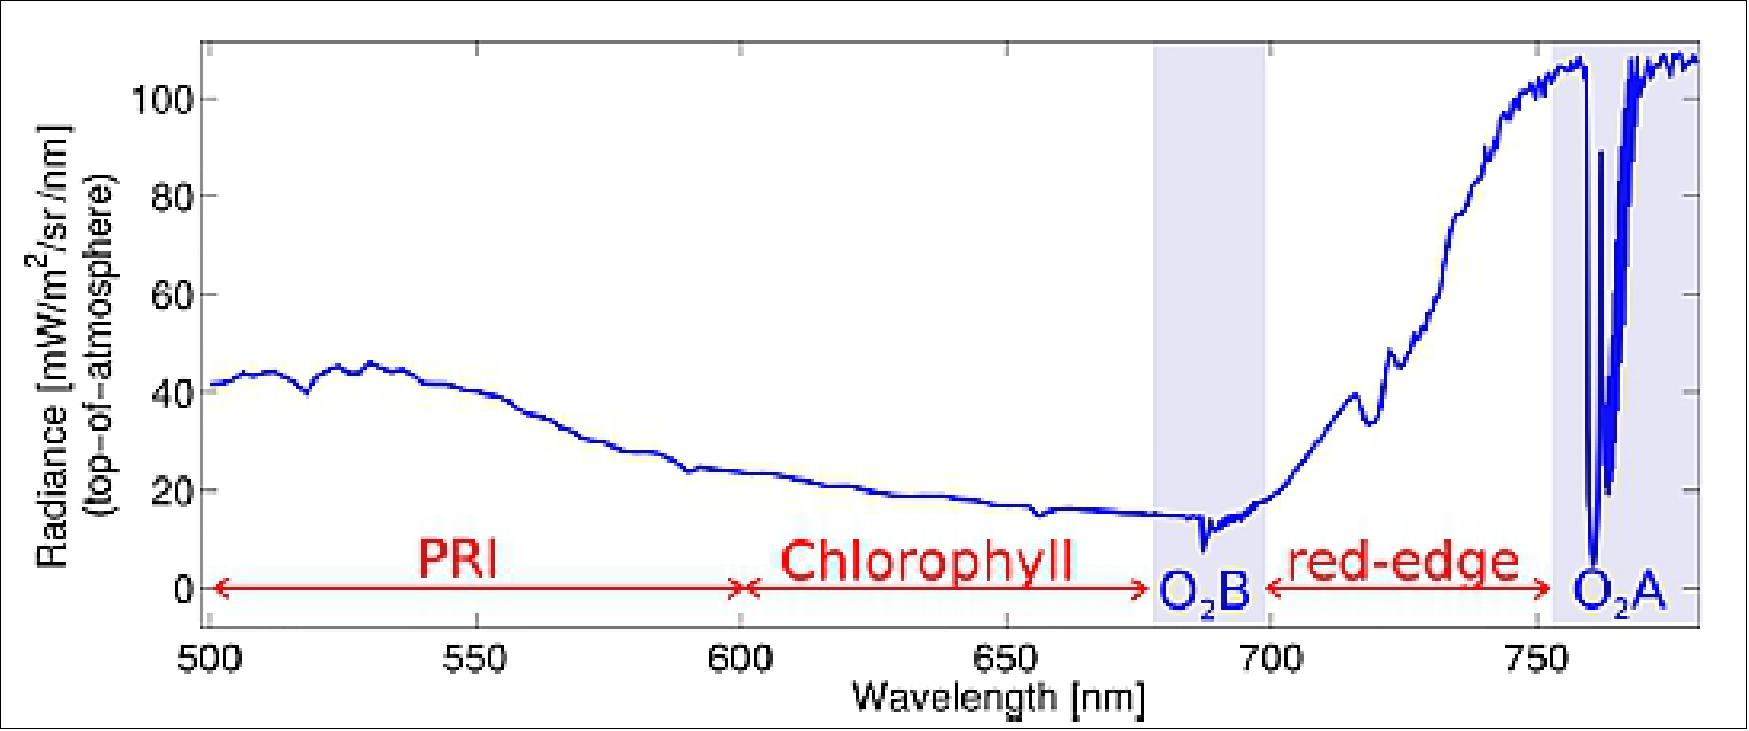 Figure 11: Spectral information provided by the FLORIS instrument (image credit: FLEX collaboration)